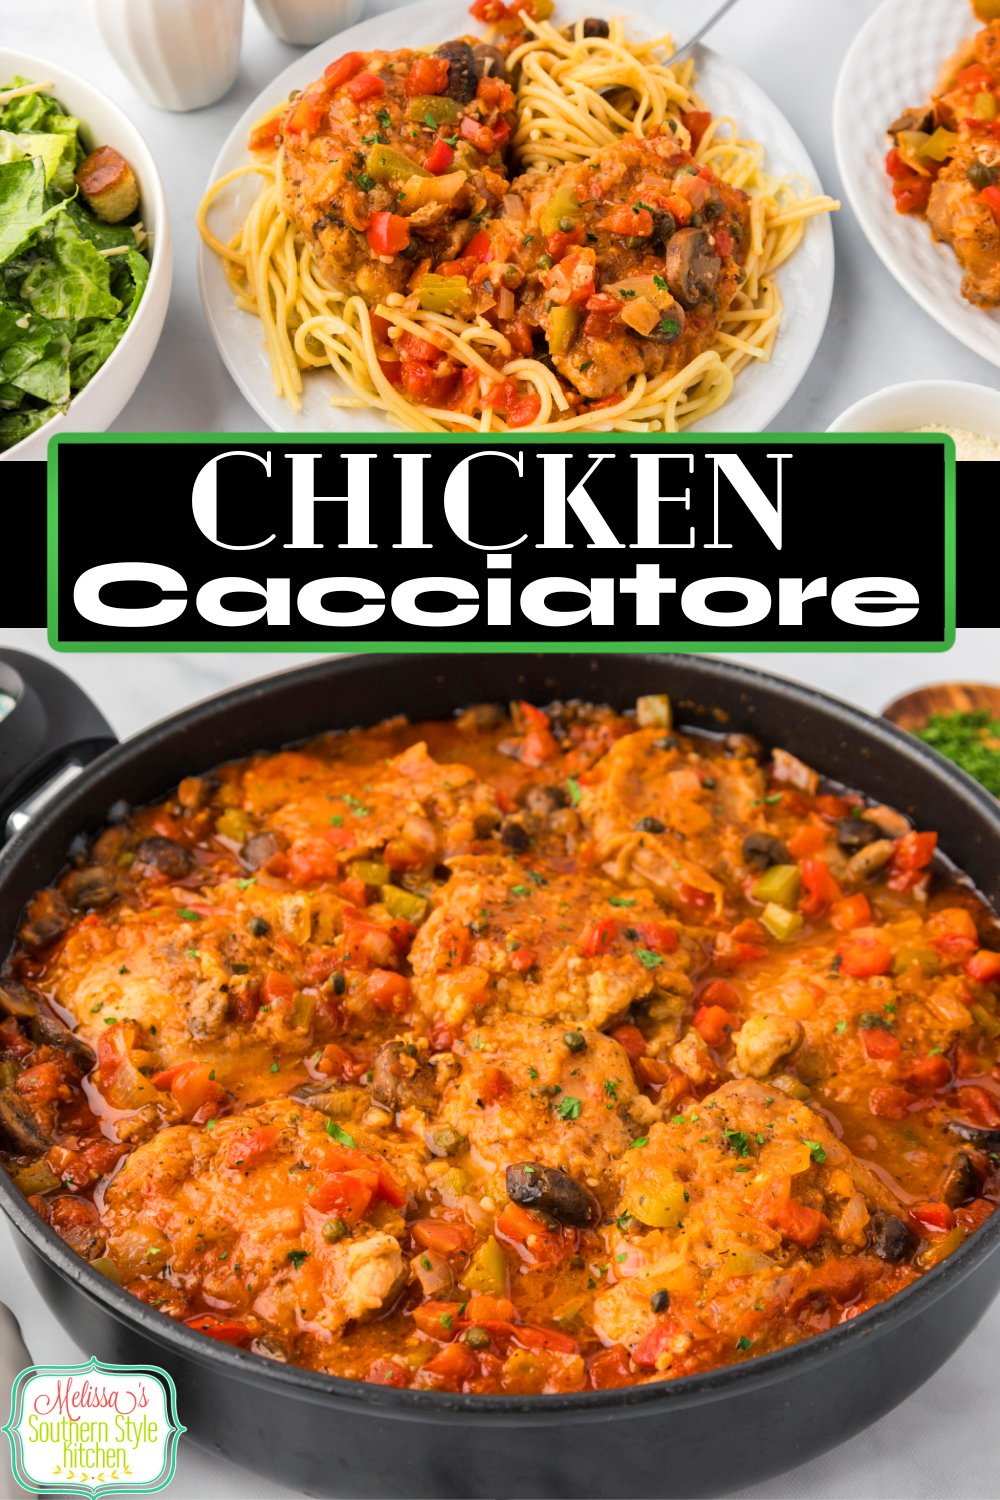 This Chicken Cacciatore Recipe features chicken thighs simmered in a robust tomato sauce seasoned with bell peppers, onion and mushrooms. #chicken #chickenrecipes #easychickenrecipes #dinnerideas #chickenthighs #chickencacciatore via @melissasssk